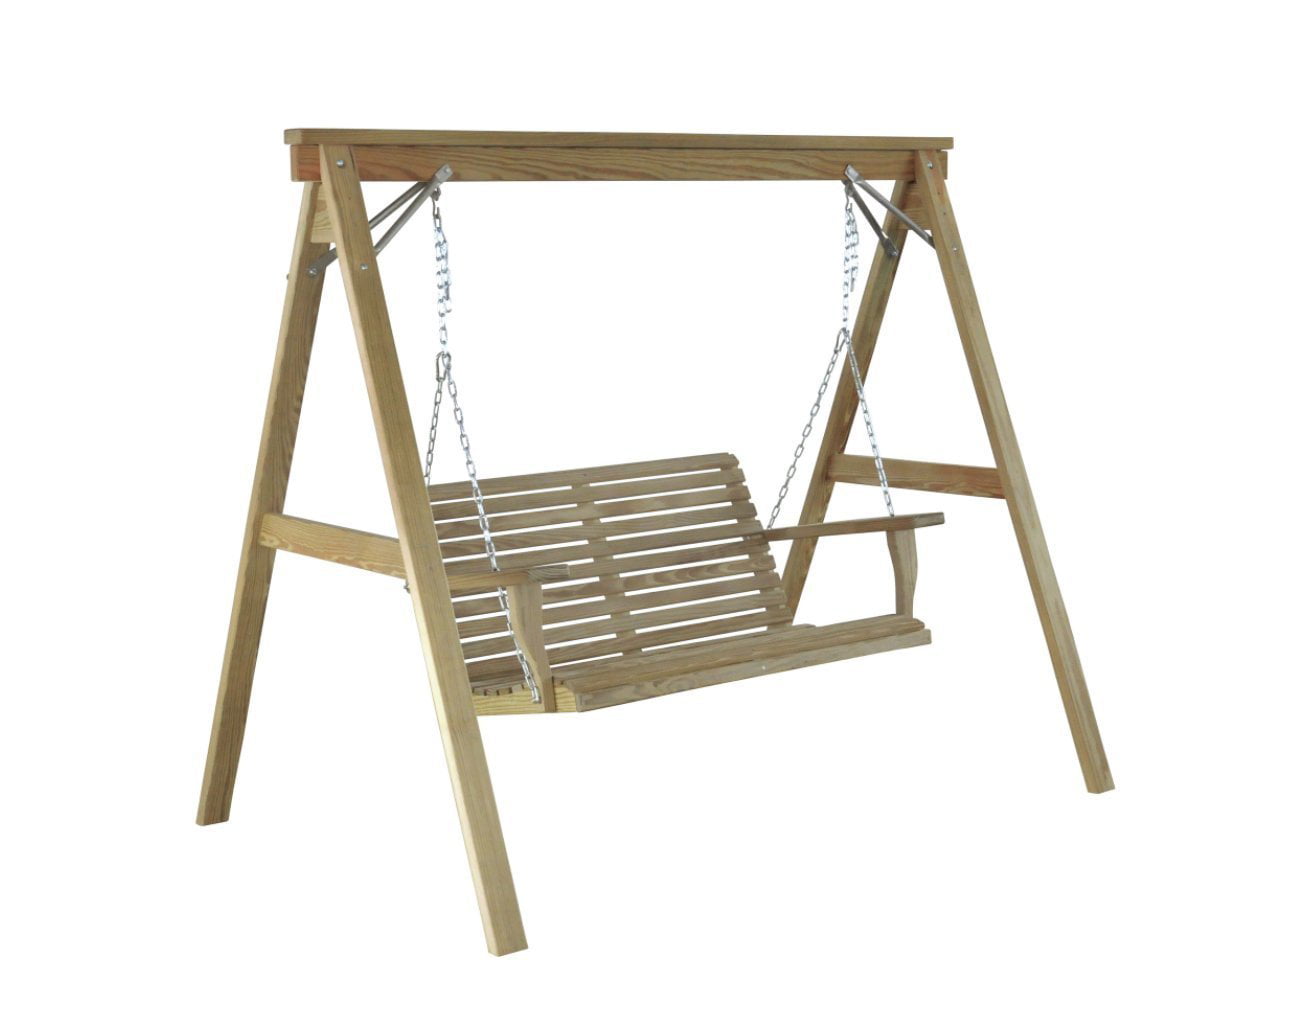 Scandinavian Style Wood Porch Swing Stand for 4ft Swings Made in USA From Selected Treated Yellow Pine and Zinc Coated Fasteners